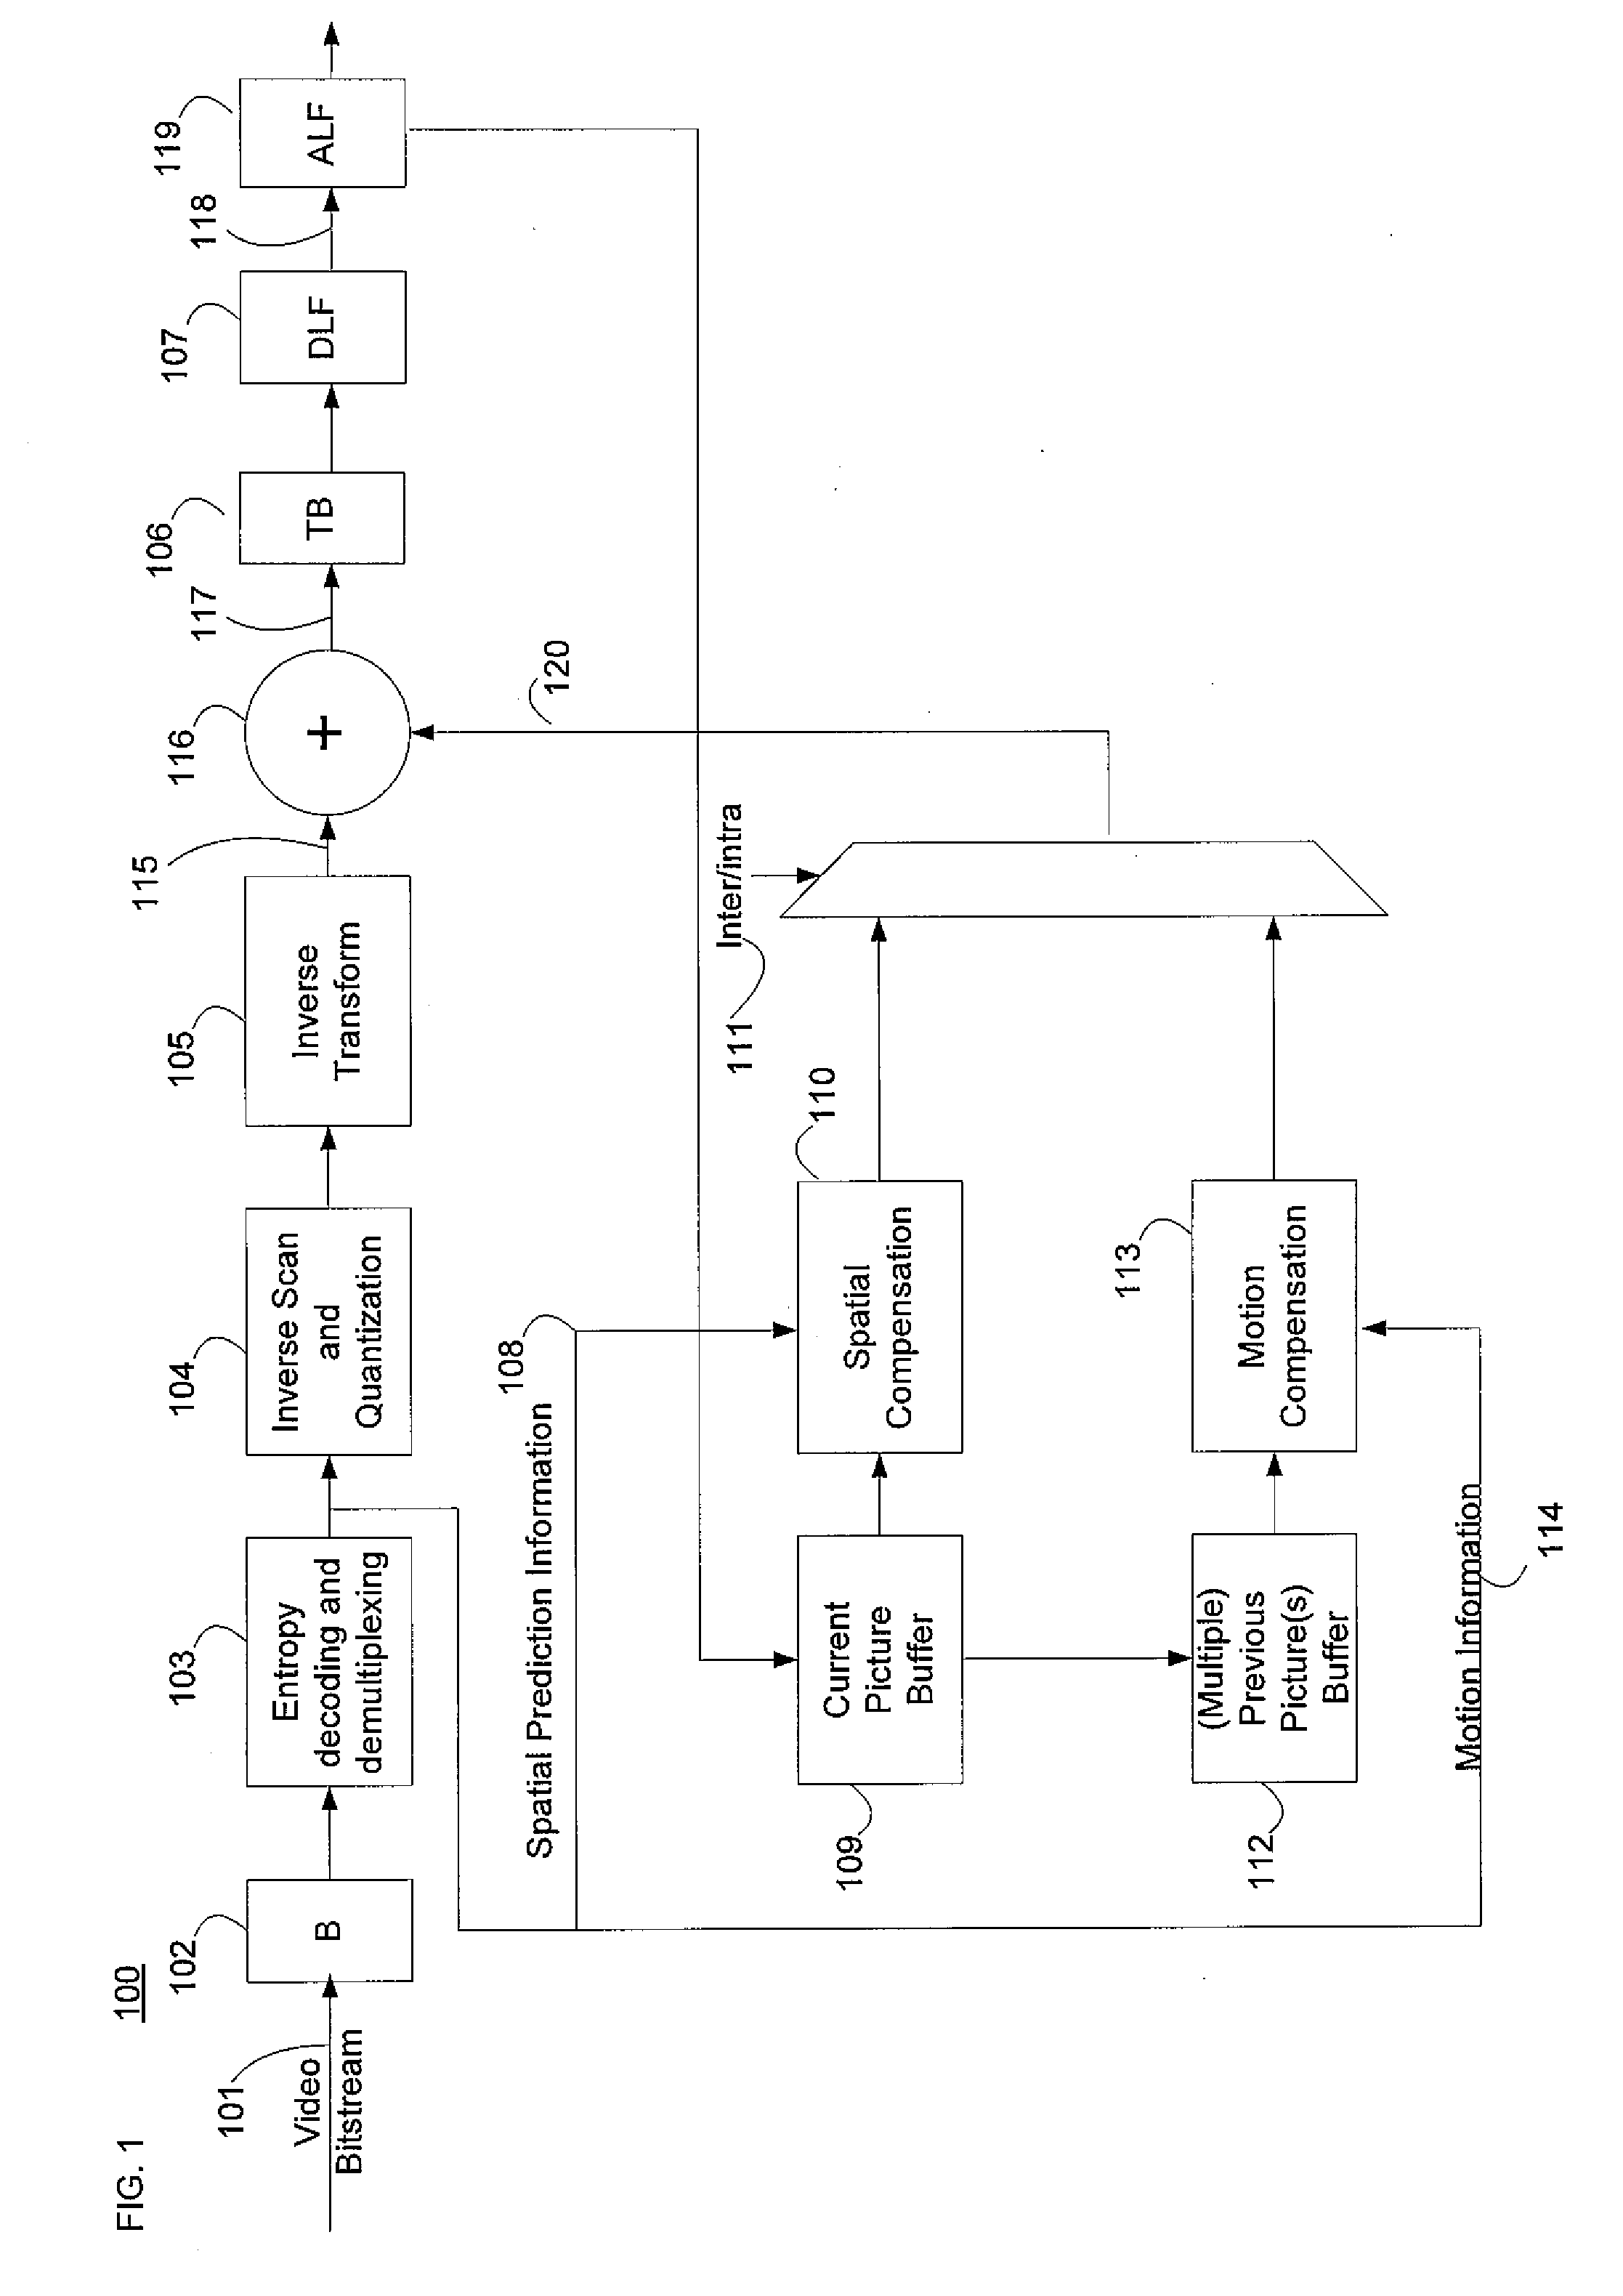 Method and System for Adaptive Interpolation in Digital Video Coding